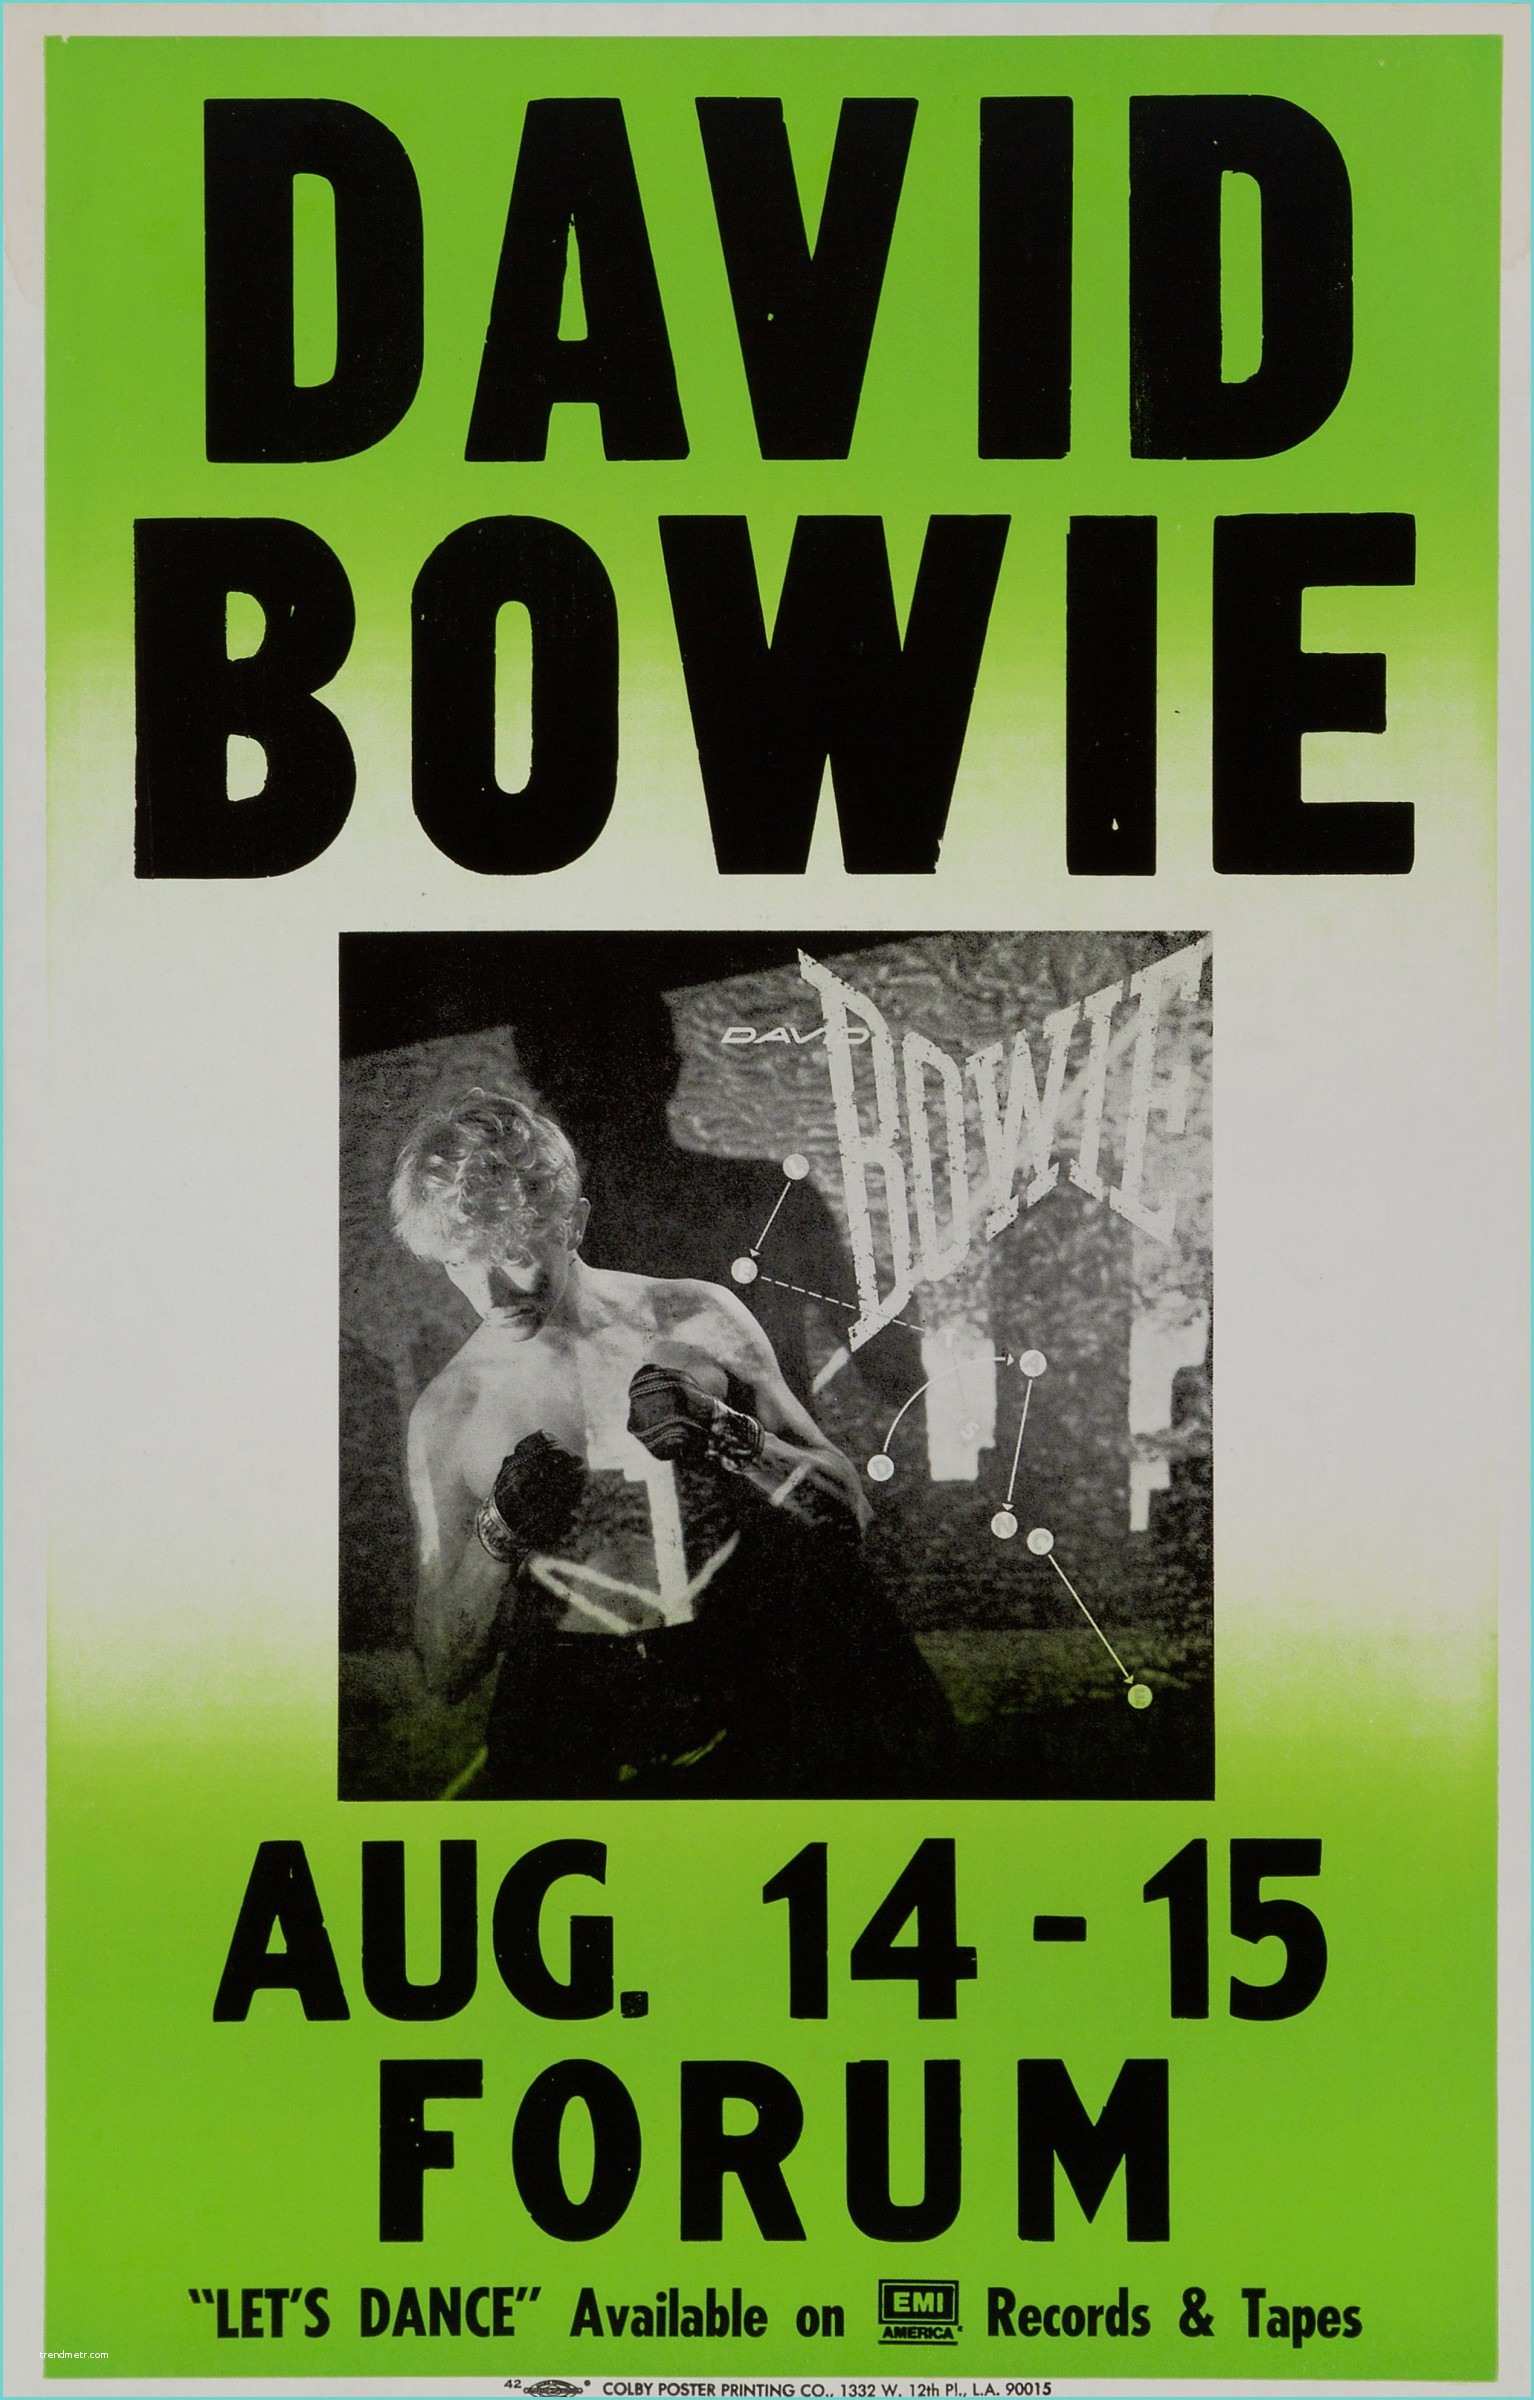 Allposters Return Policy David Bowie 1983